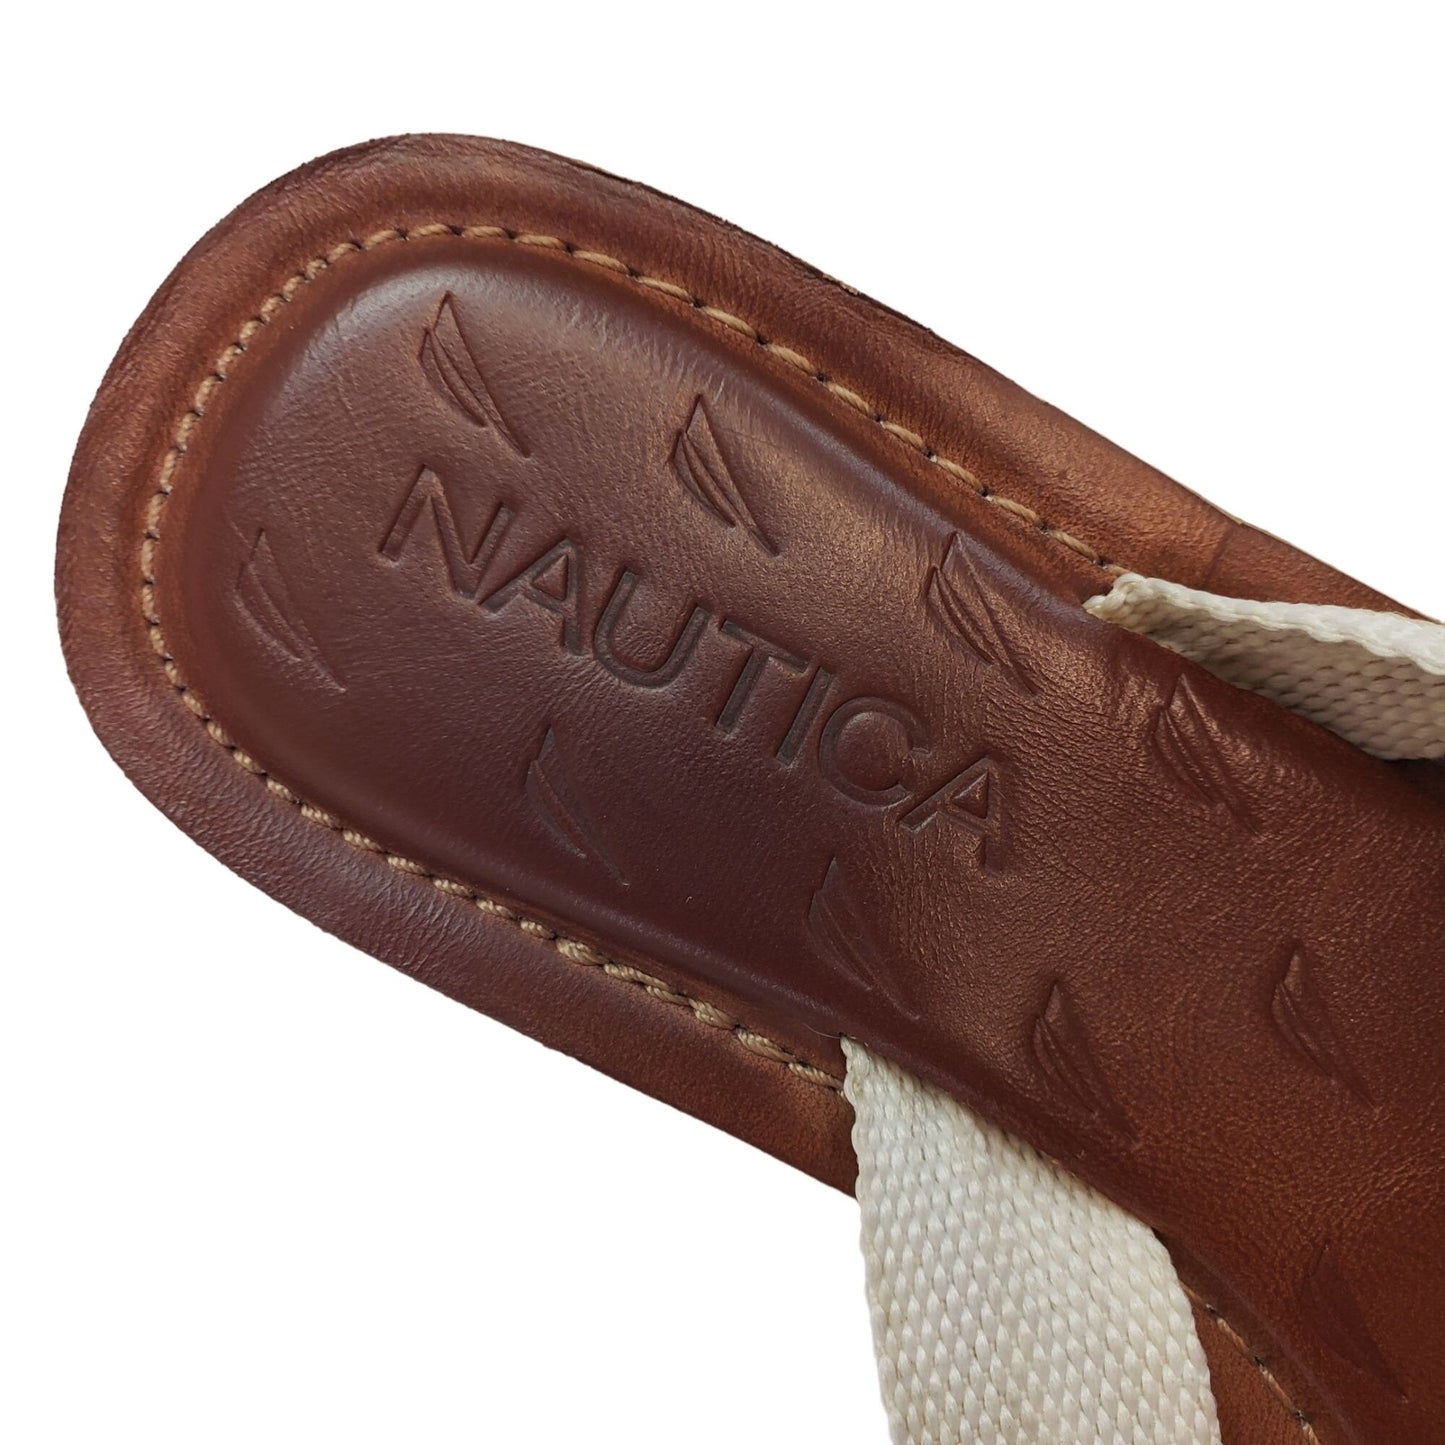 Nautica Leather and Canvas Thong Sandals Size 7 (est)